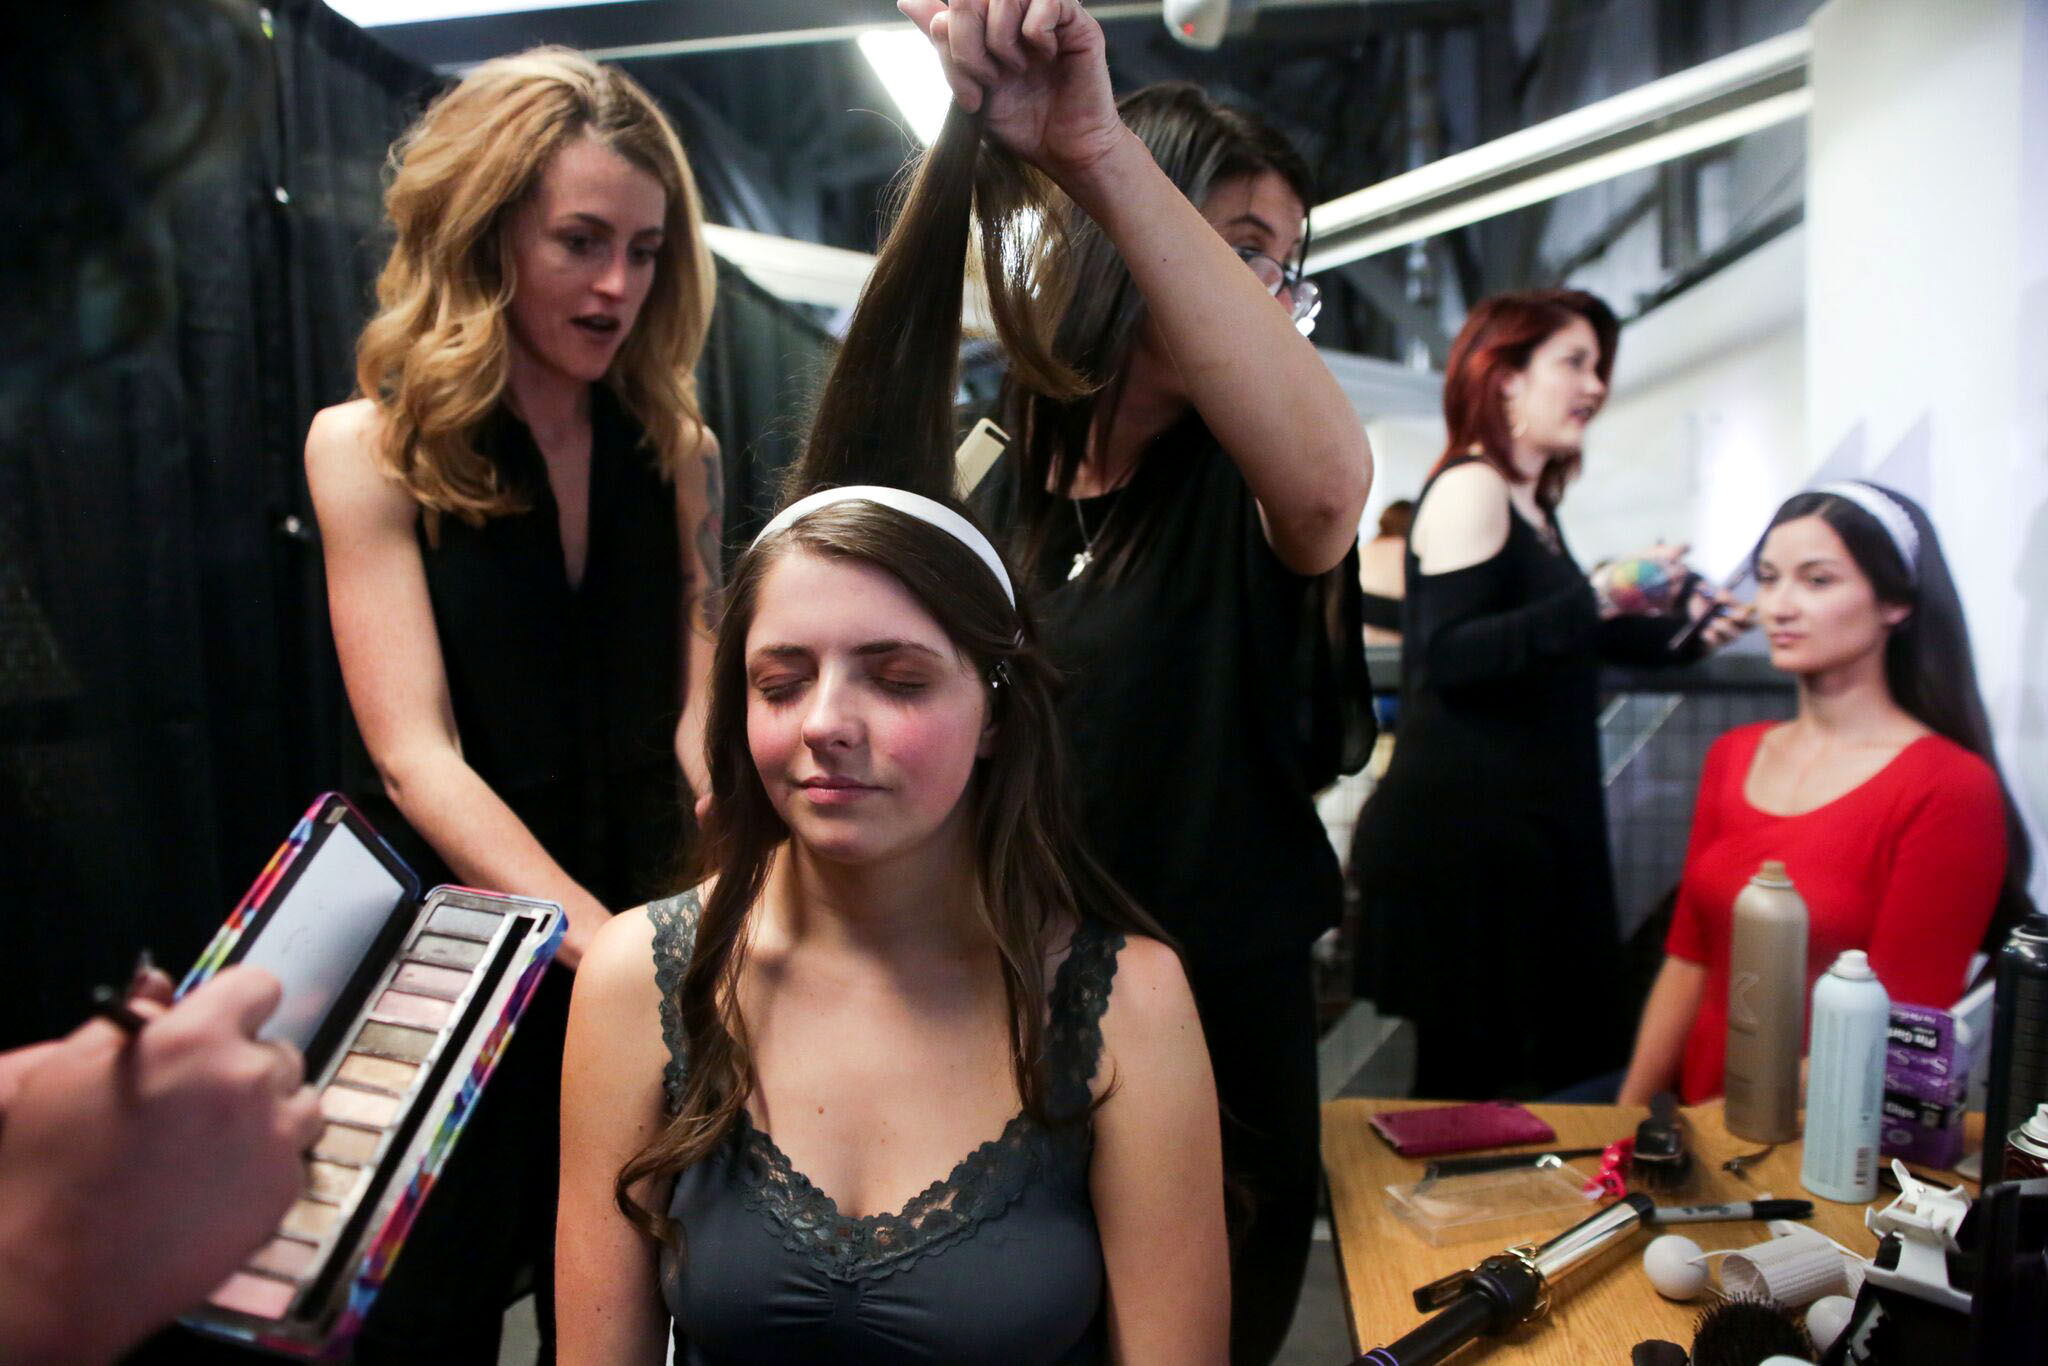  Makeup artists and hairstylists get a model ready for the runway during Denver Fashion Week on March 18, 2018 at Wings Over the Rockies Air and Space Museum in Denver, Colorado. 